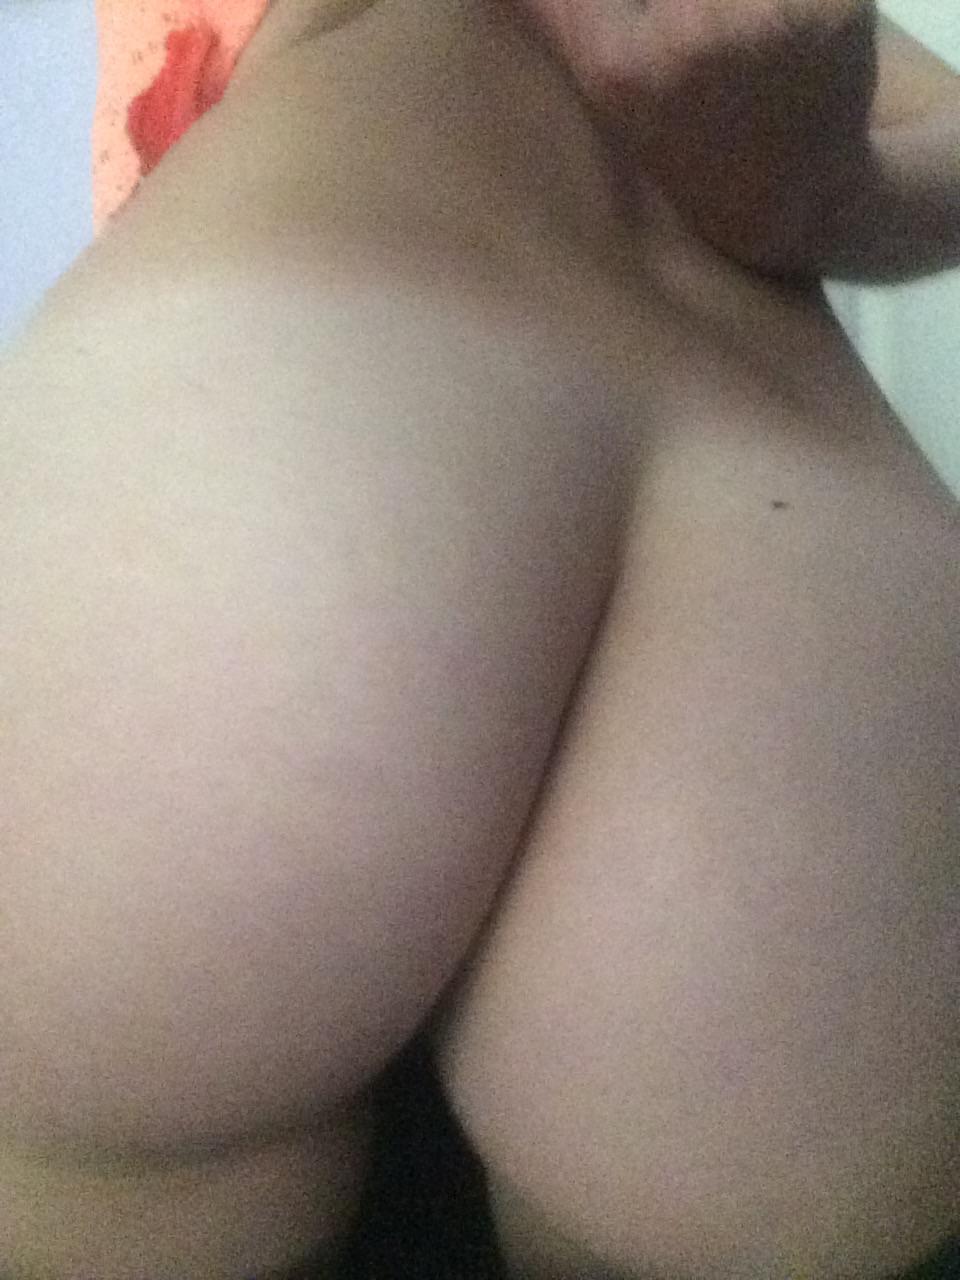 A[F]ter some time at the tanning bed she sent me this to show off her tan lines